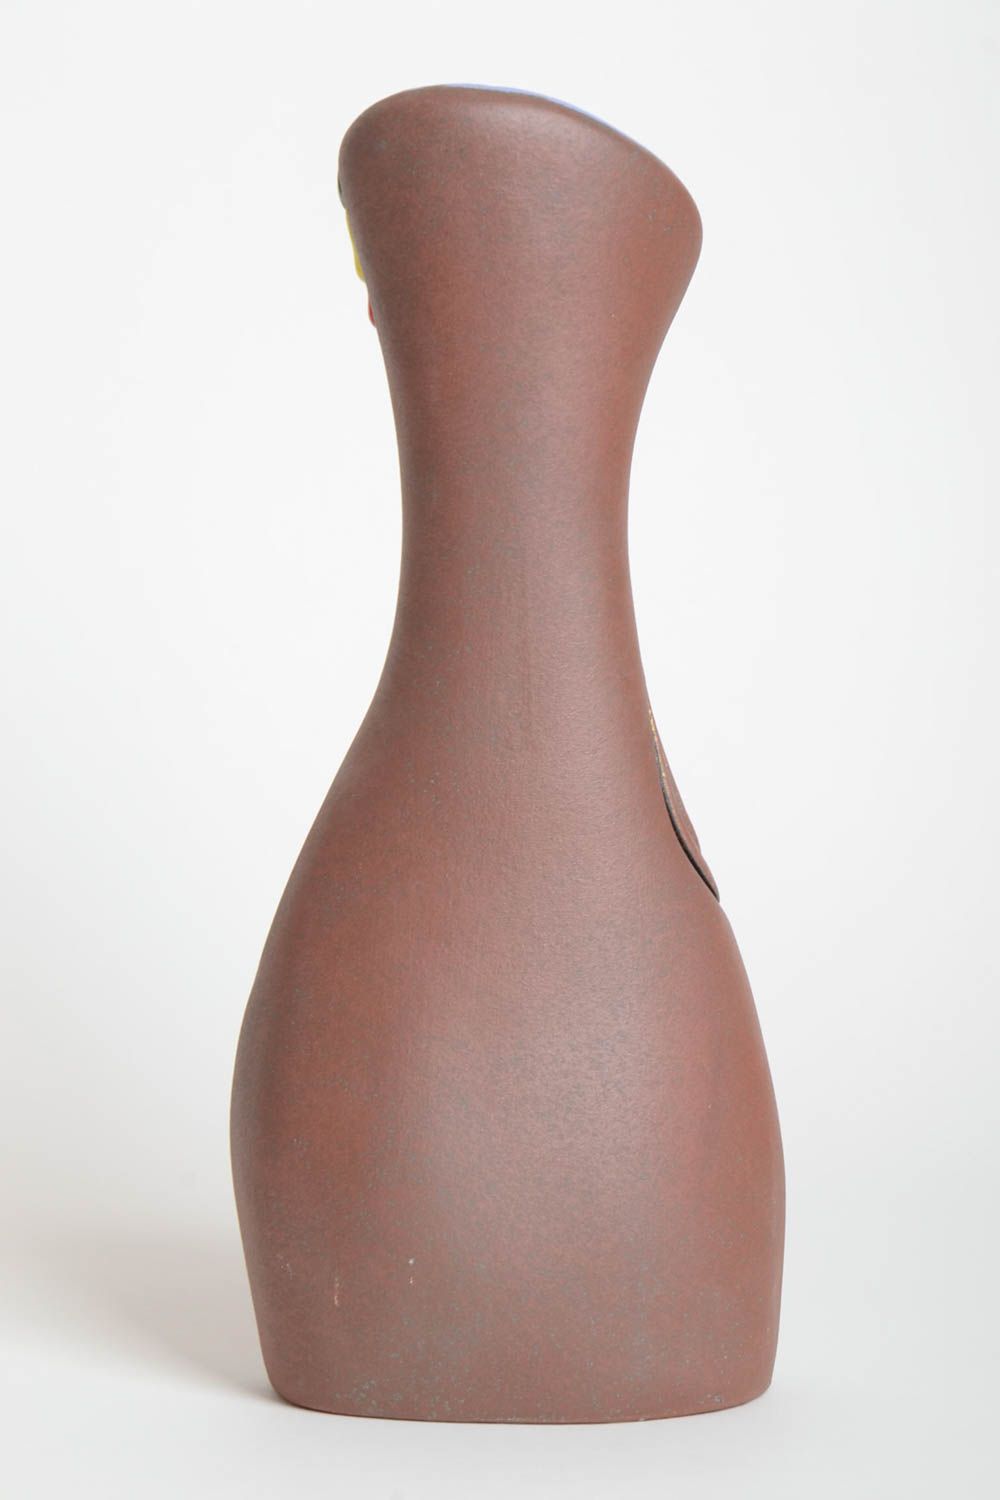 Flower vase 14 inches décor in brown color 2,15 lb photo 4